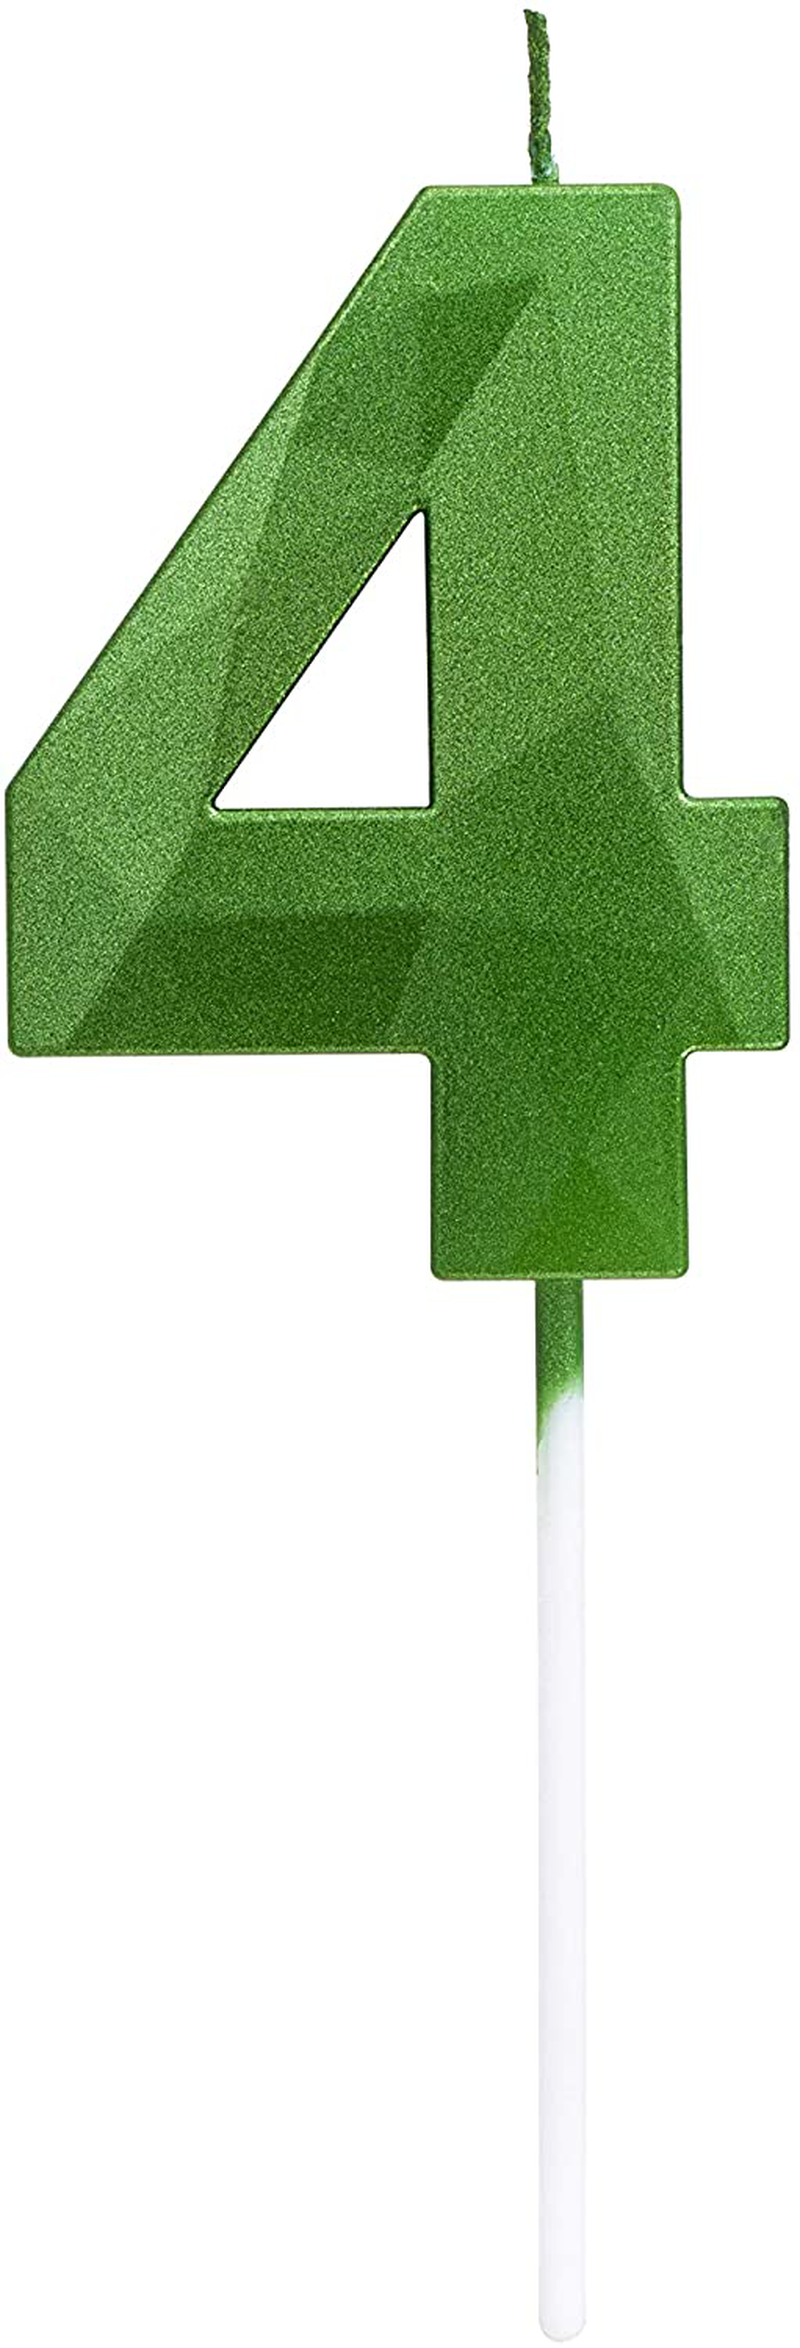 Green Happy Birthday Cake Candles,Wedding Cake Number Candles,3D Design Cake Topper Decoration for Party Kids Adults (Green Number 6) Home & Garden > Decor > Seasonal & Holiday Decorations& Garden > Decor > Seasonal & Holiday Decorations MEIMEI Green number 4 